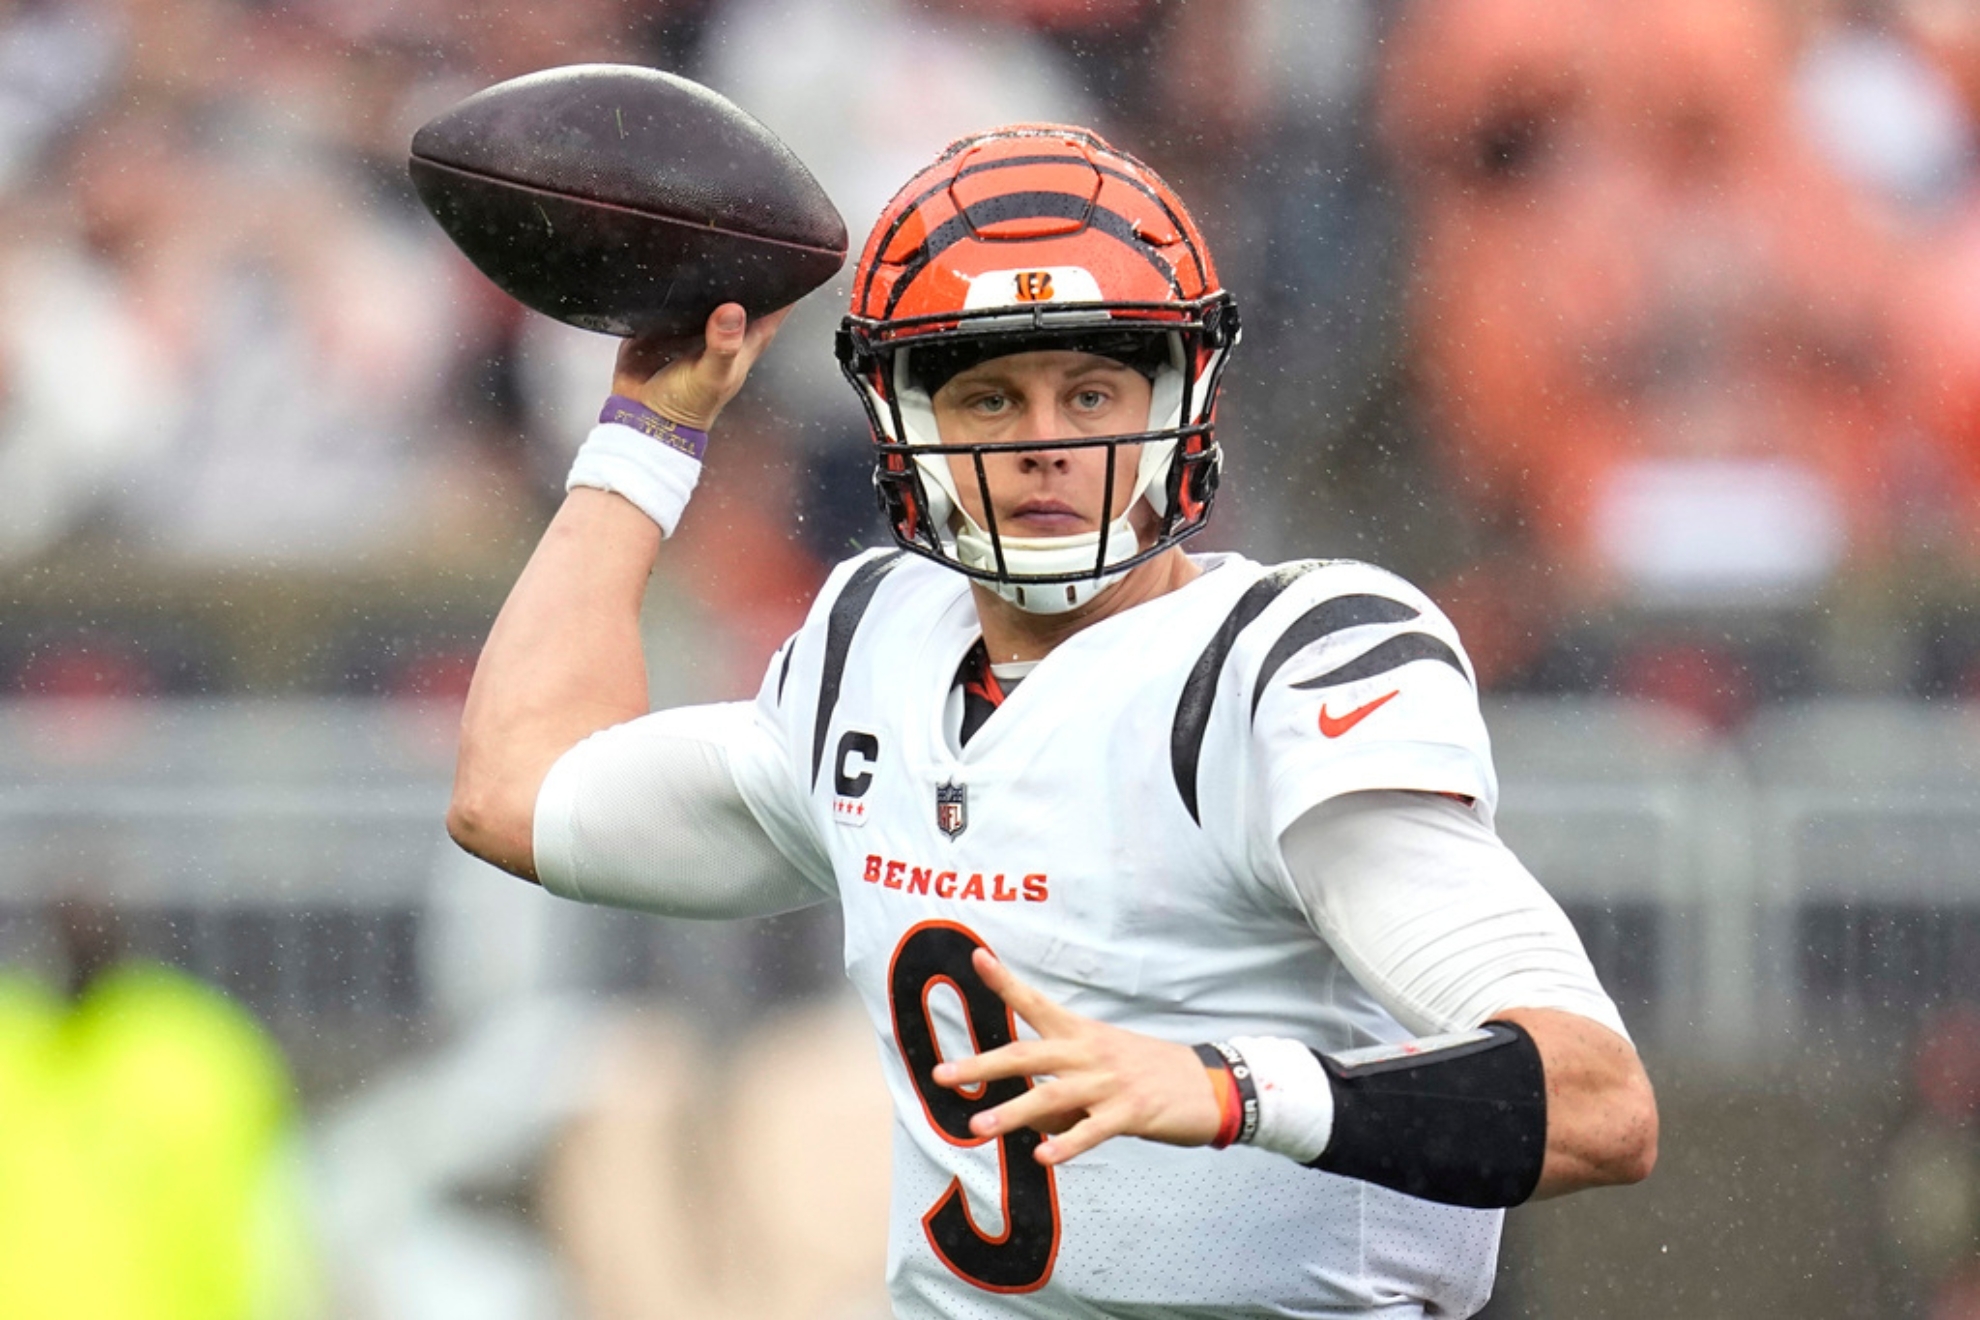 Joe Burrow is expected to play for Bengals against the Rams on MNF